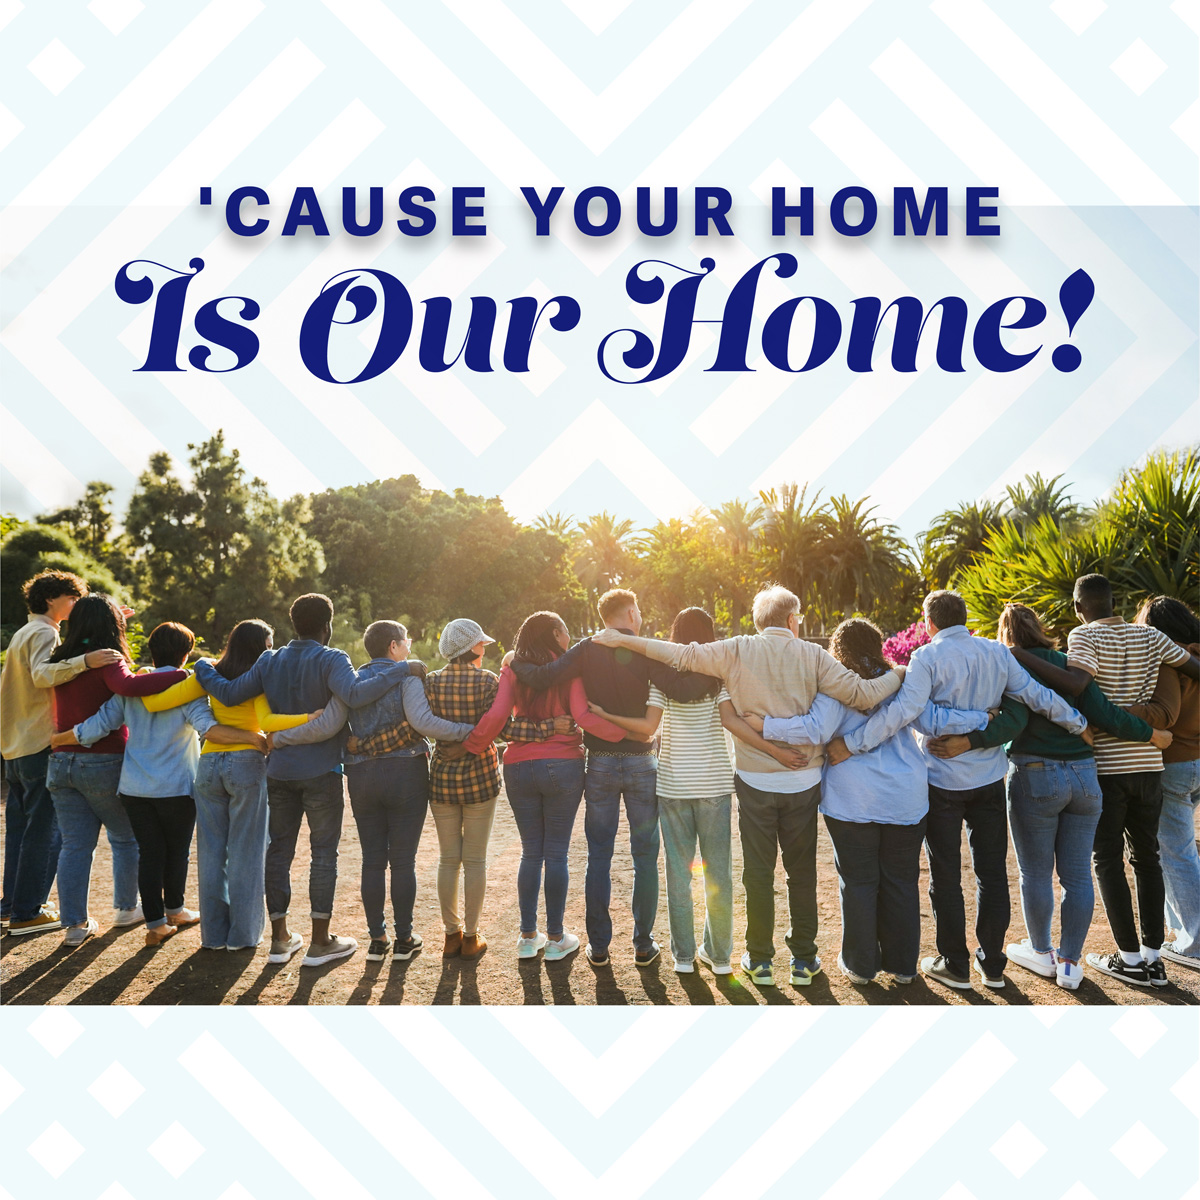 Stick to what you know and trust when it comes to the big bucks 💰. Your family home is special and should be treated as such. Look in your community for a better mortgage experience! 🏡

🐺🐺🐺🐺
#Loanwolflending
#Mortgagebroker
#Homeloanswithabite
#Abetterbreedofhomeloans